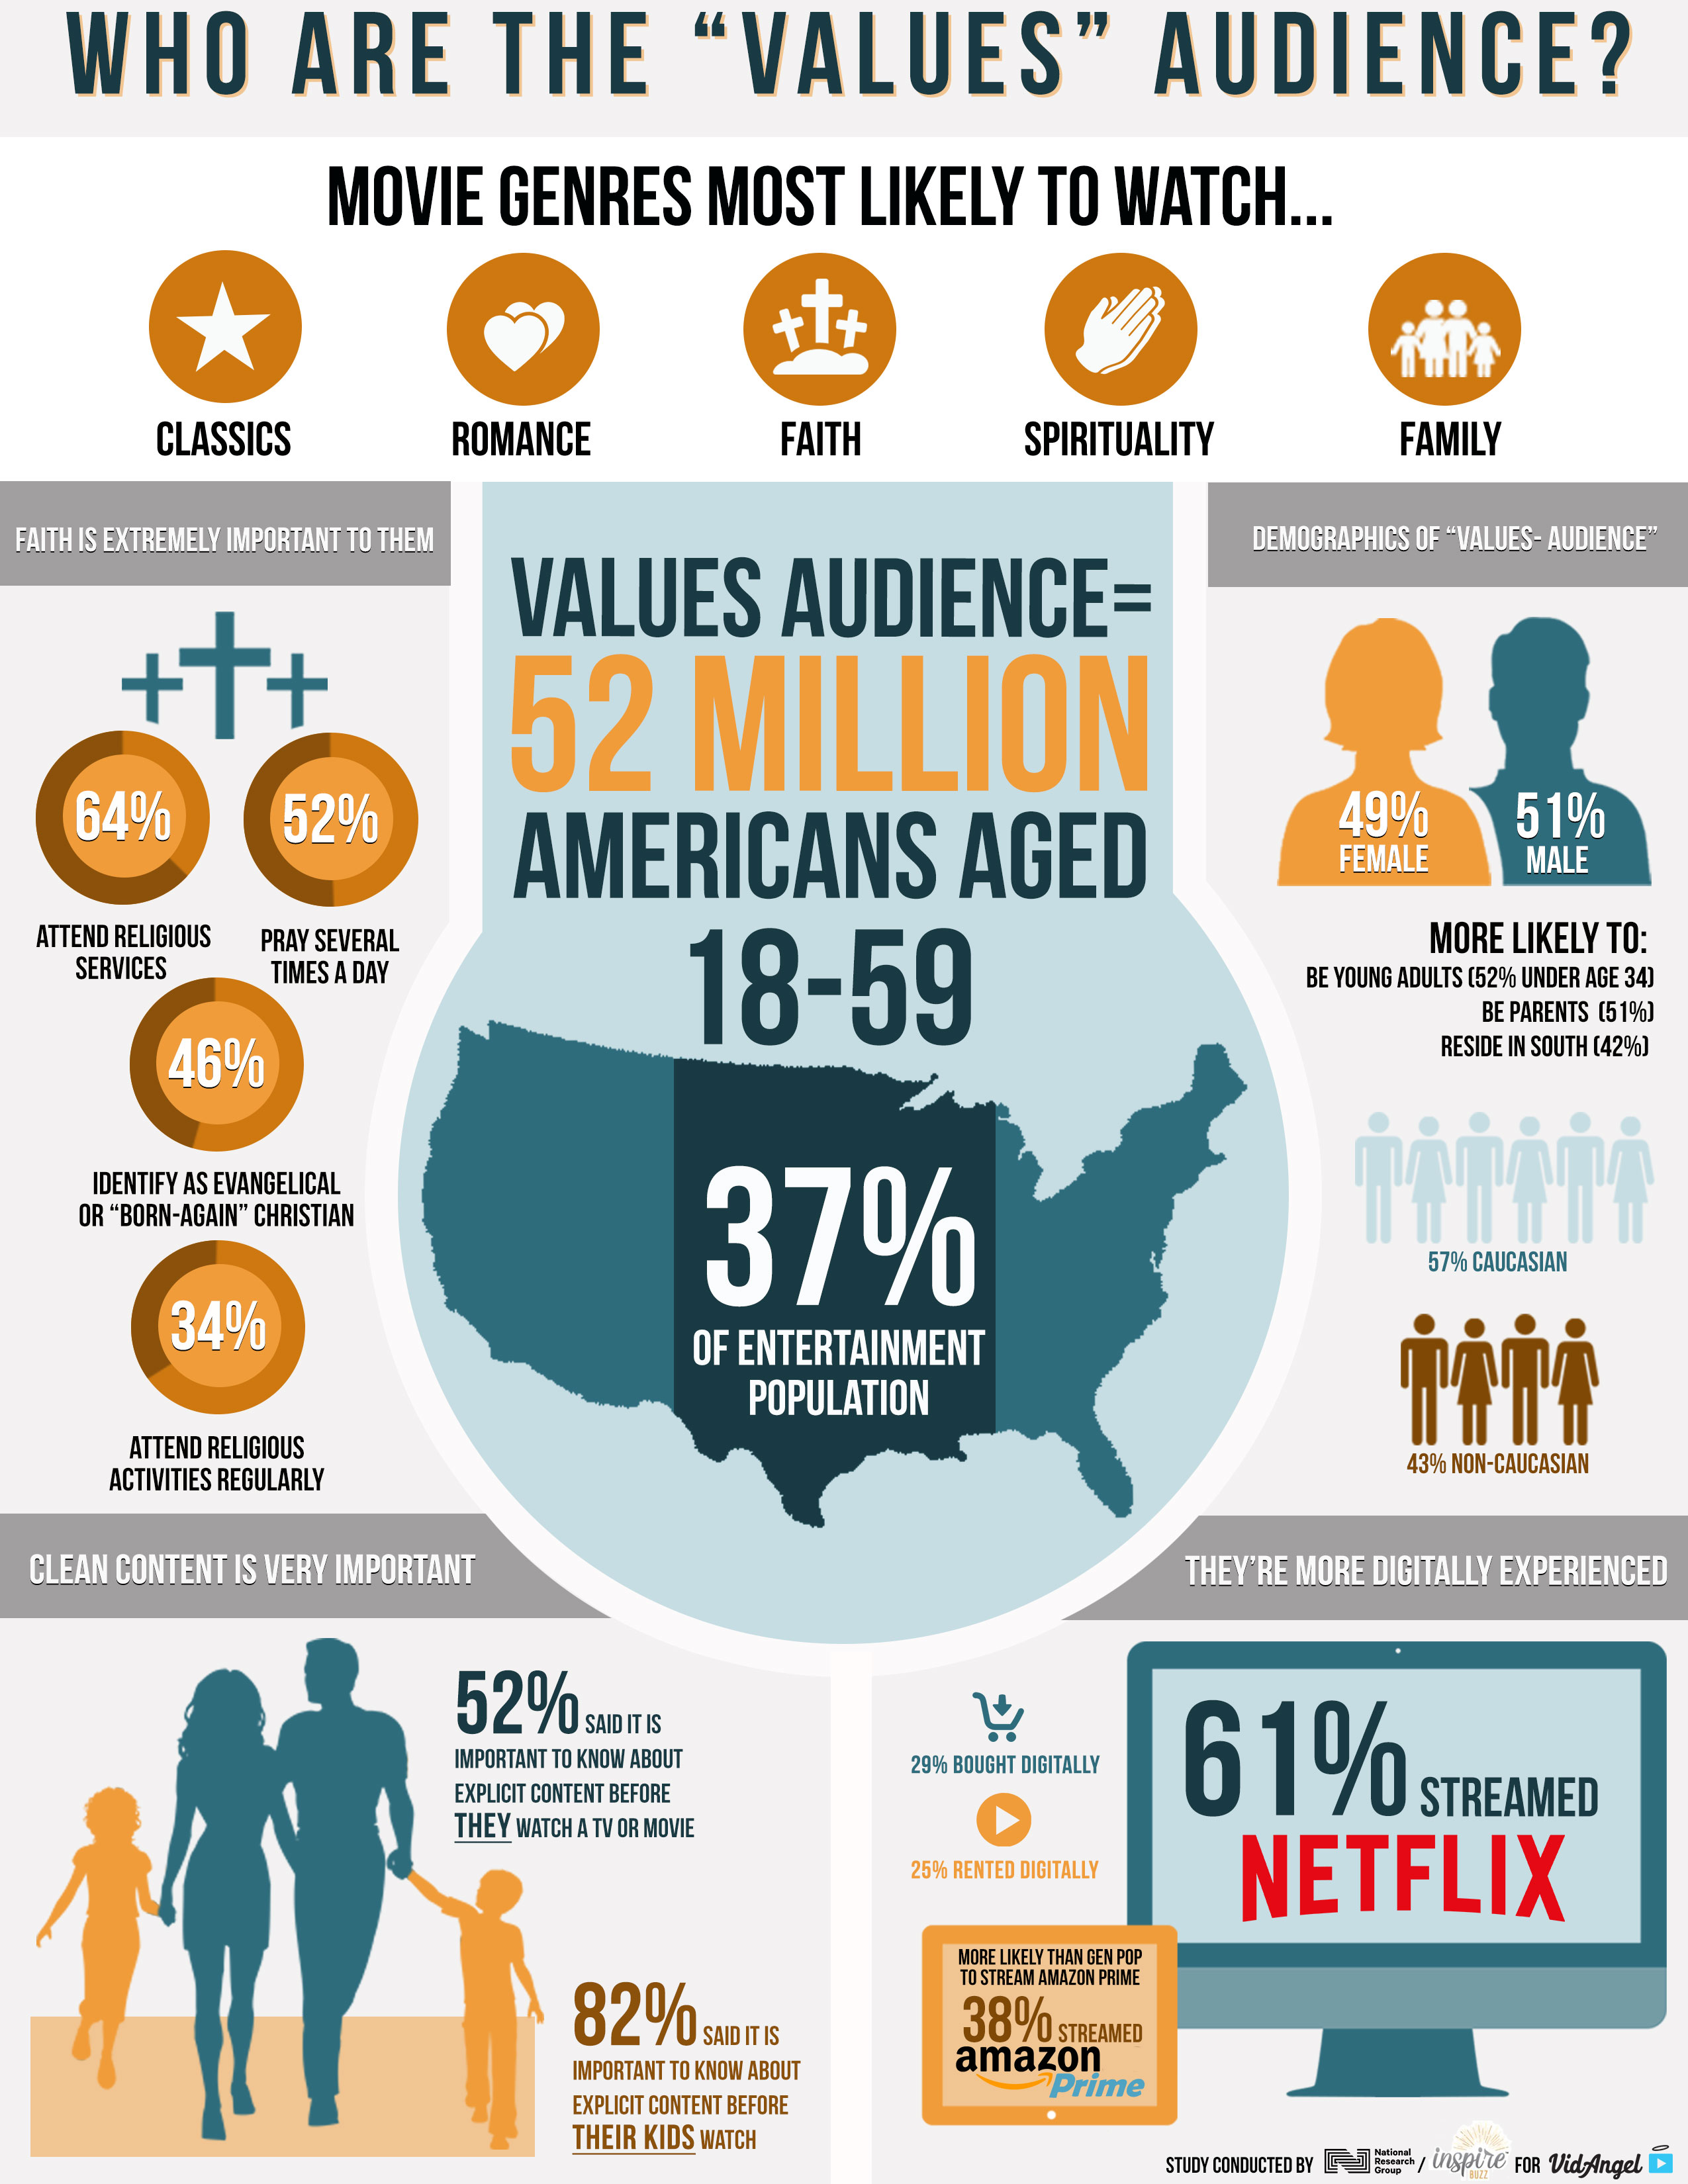 (Infographic: InspireBuzz/National Research Group poll for VidAngel) 